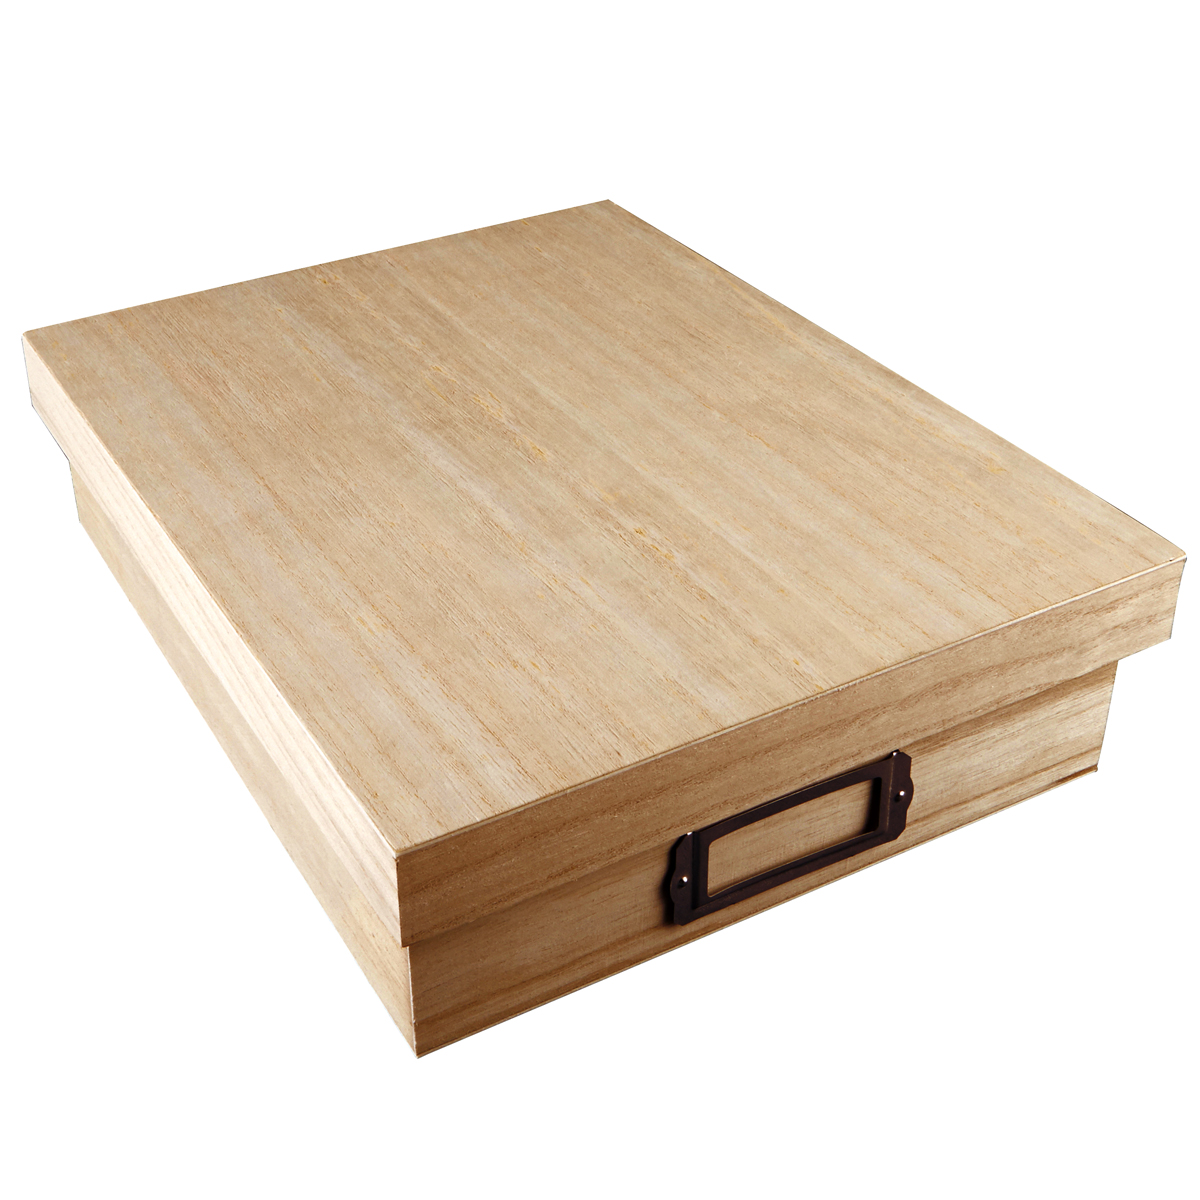 Wood Box By ArtMinds®
